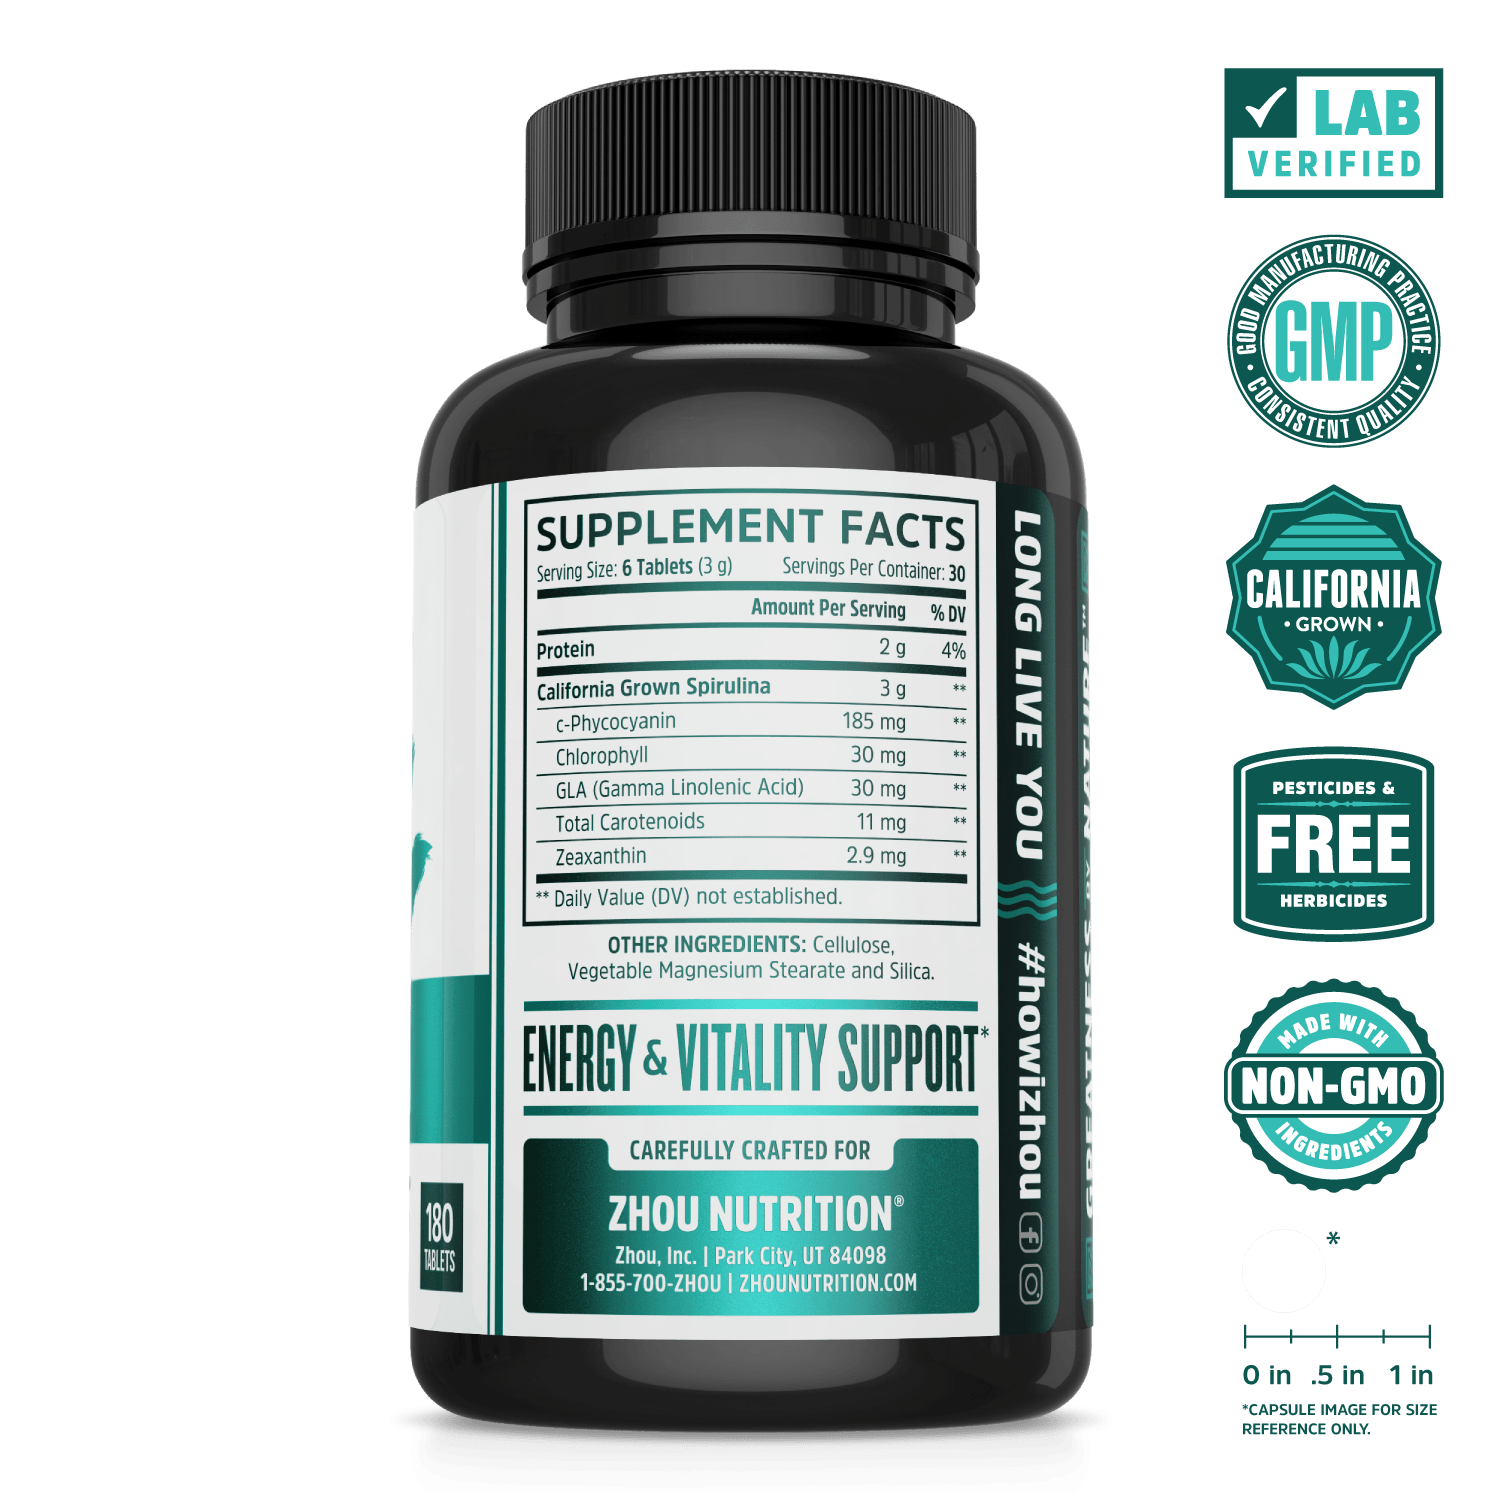 Zhou Nutrition Spirulina Superfood Tablets. Lab verified, good manufacturing practices, california grown, pesticides & herbicides free, made with non-GMO ingredients